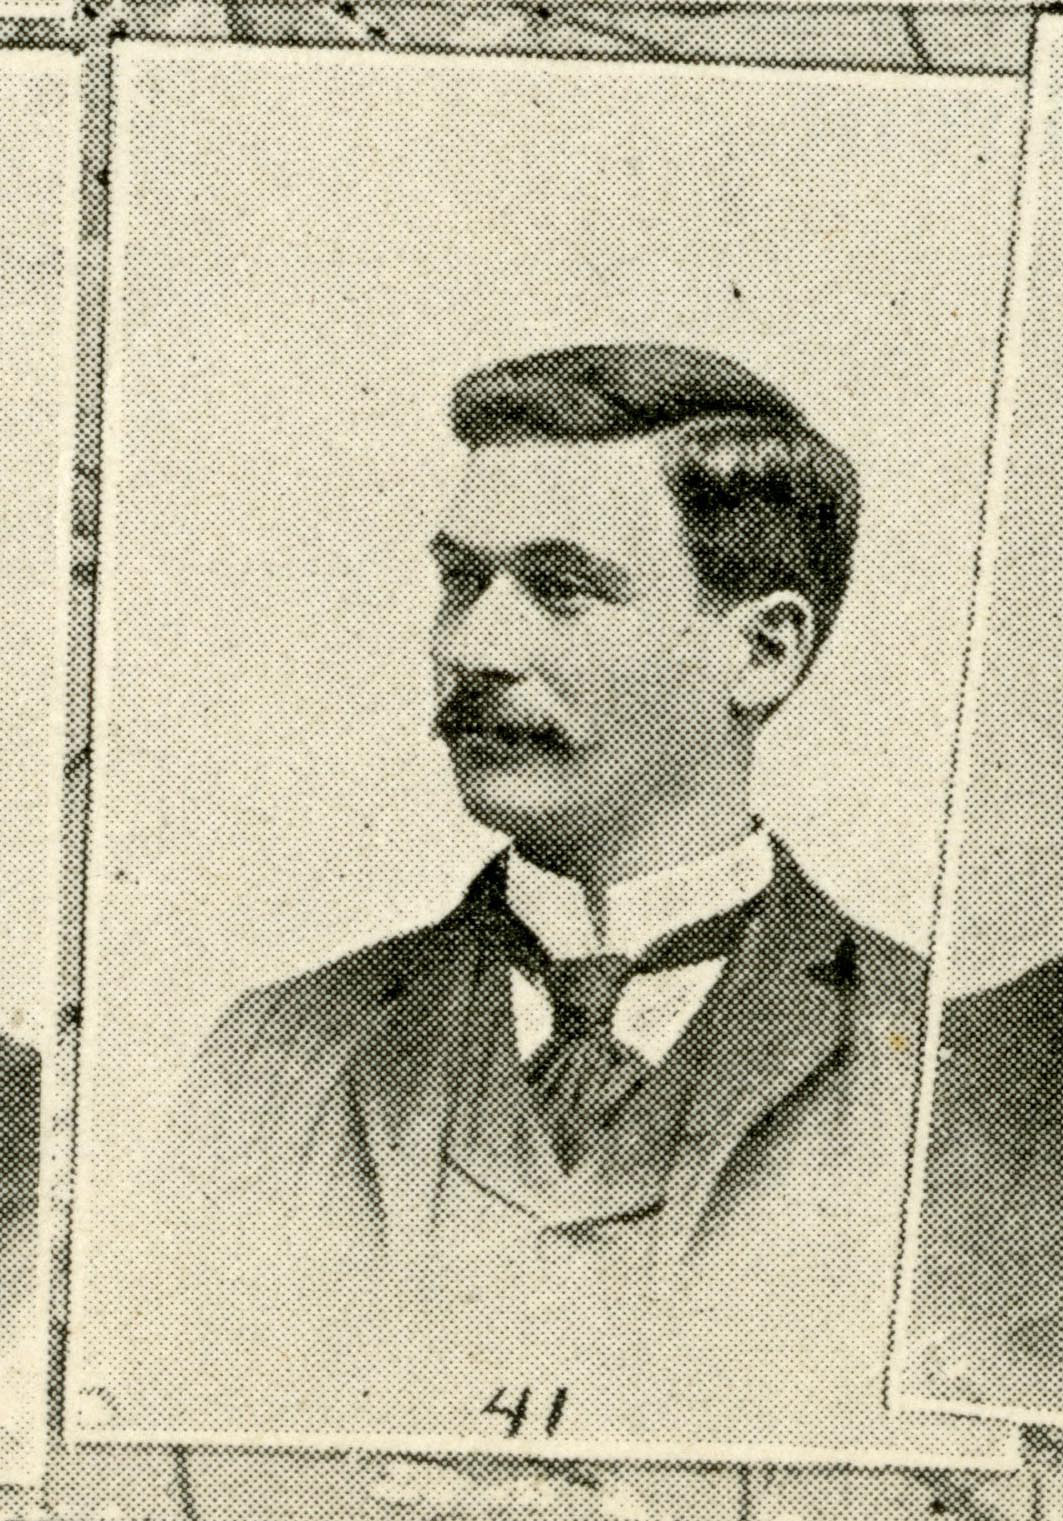 Black and white scan from the IU Arbutus yearbook. Image shows a man with dark hair and mustache wearing a suit and tie. 